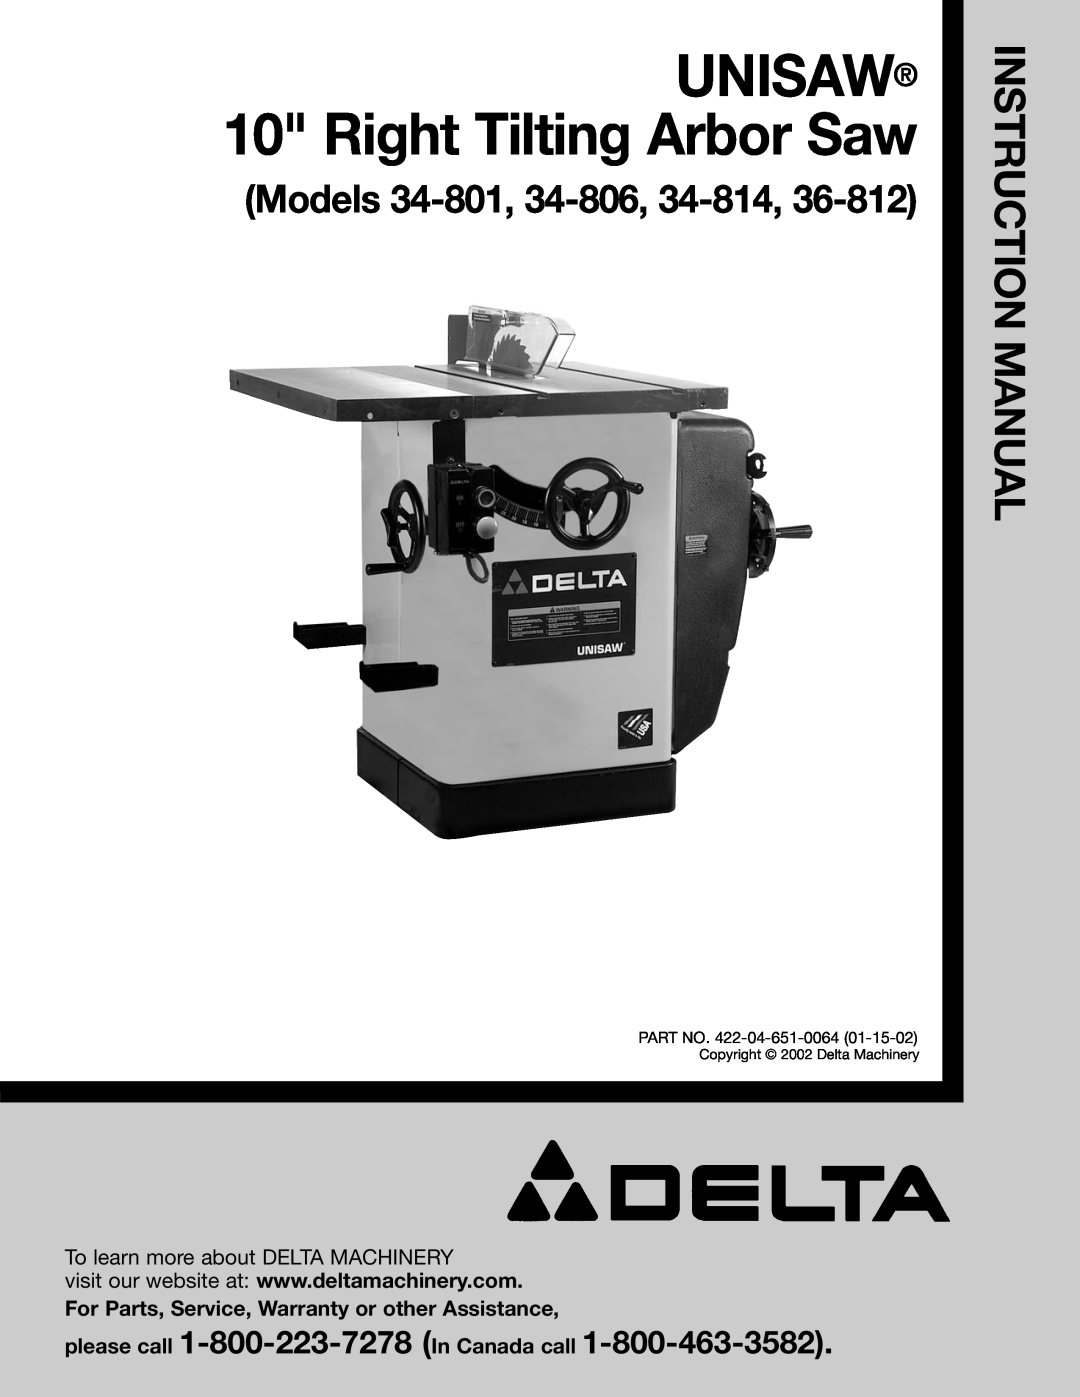 Delta 34-806, 34-814 instruction manual please call 1-800-223-7278 In Canada call, UNISAW 10 Right Tilting Arbor Saw 